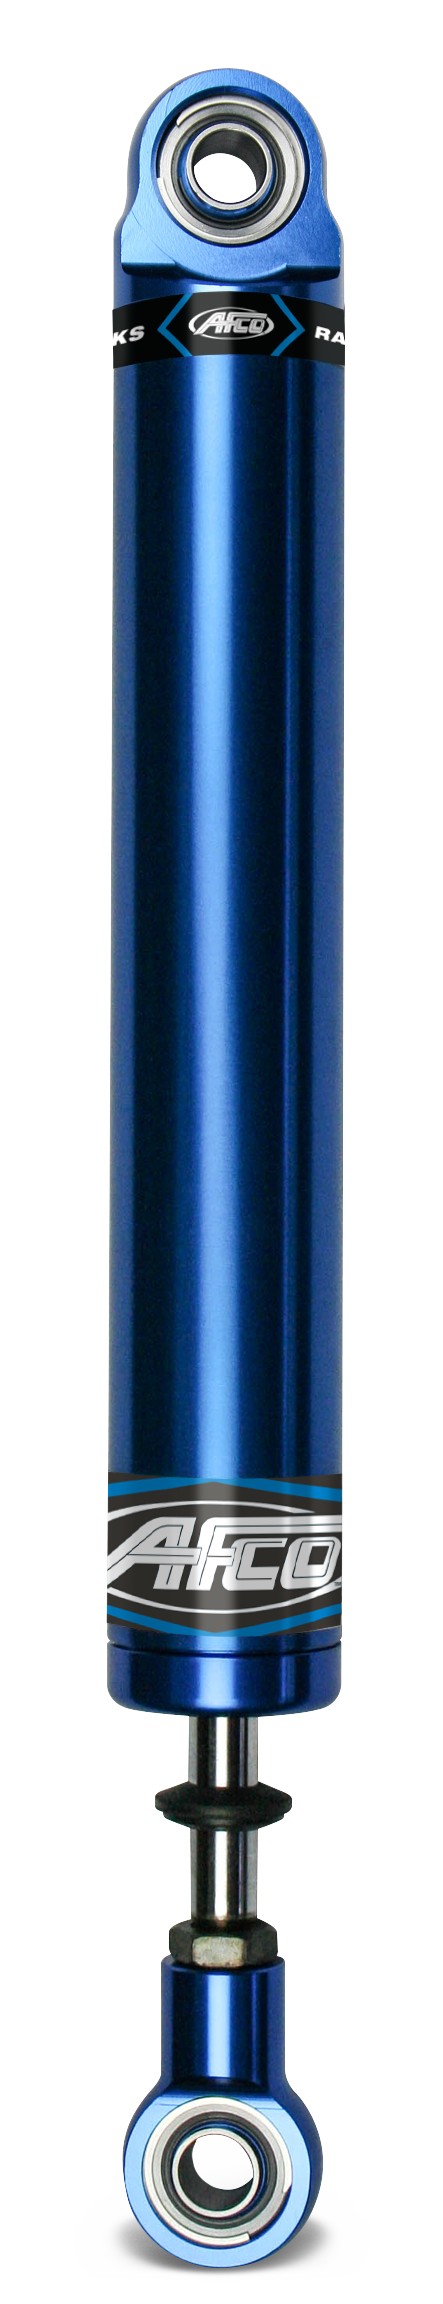 Aluminum Shock Twin Tube 16 Series Small Body 6 Inch Comp 2/Reb 6  